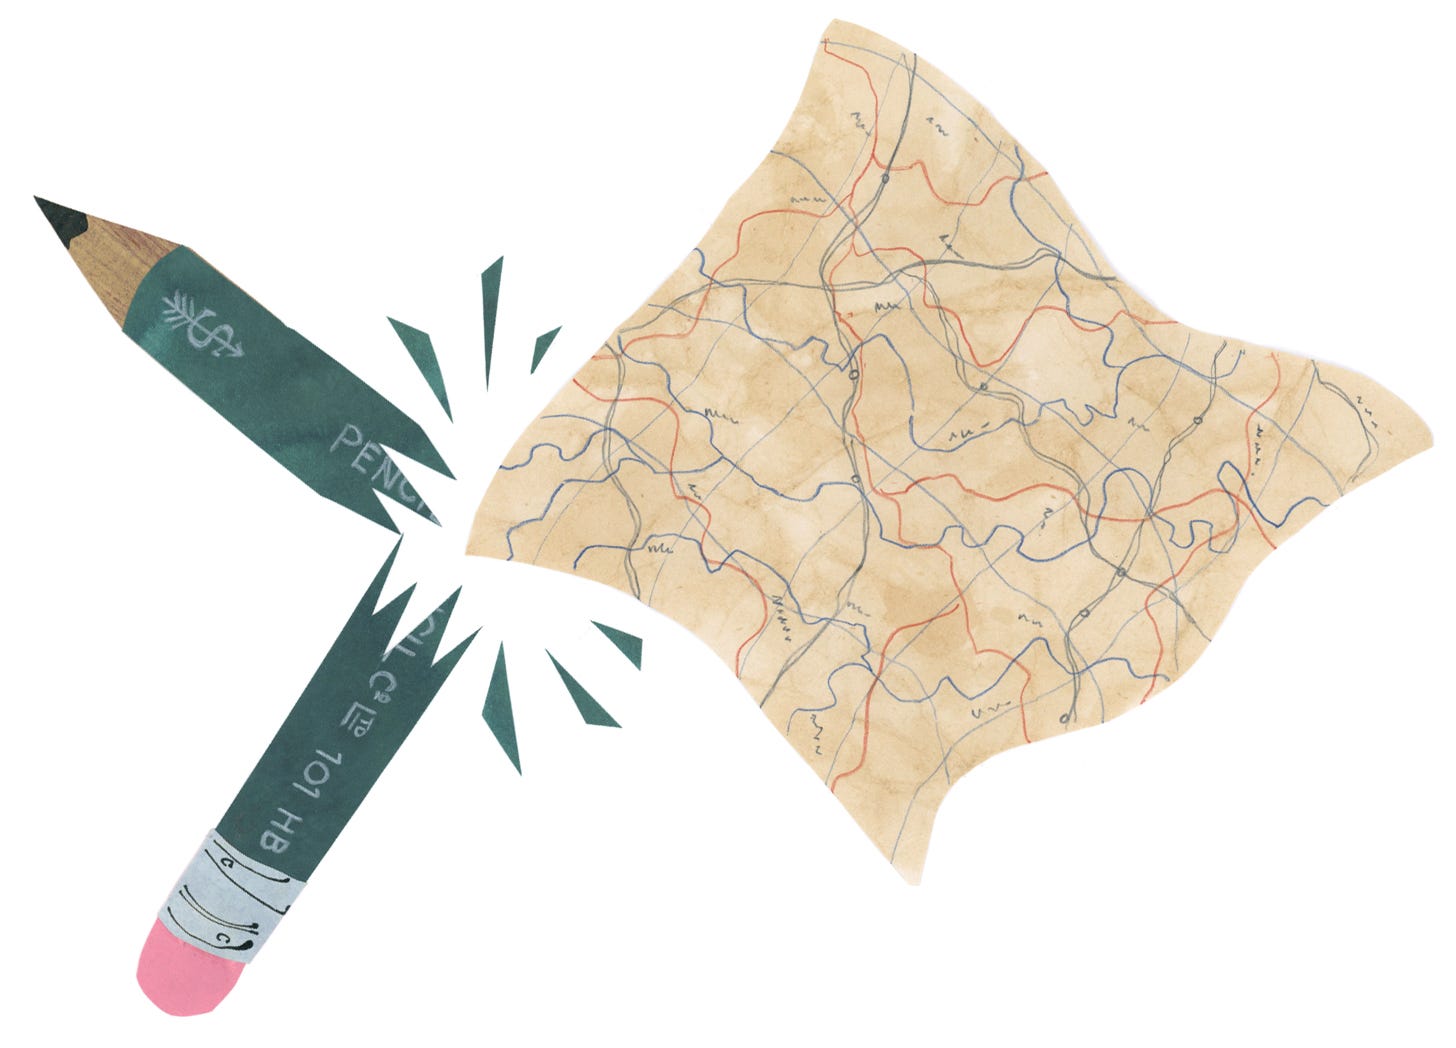 collage illustration of a green pencil broken in half with an open map spilling out